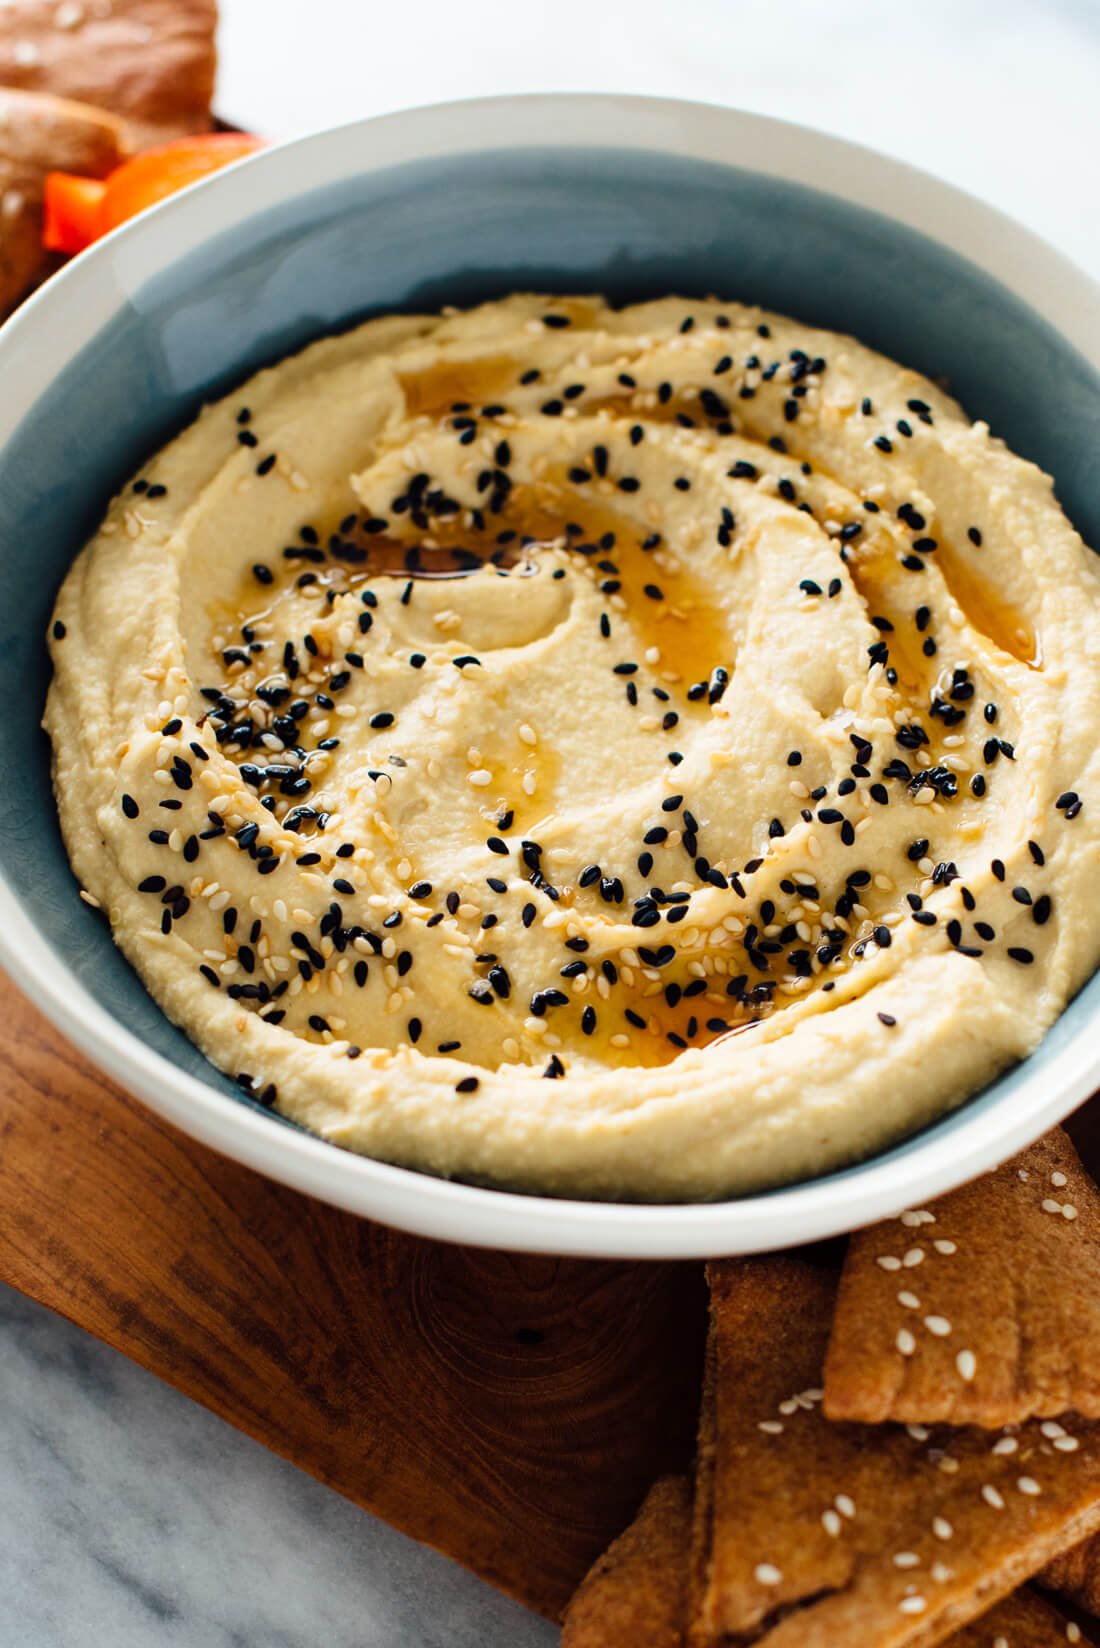 Ultra creamy hummus recipe with toasted sesame oil for extra sesame flavor!